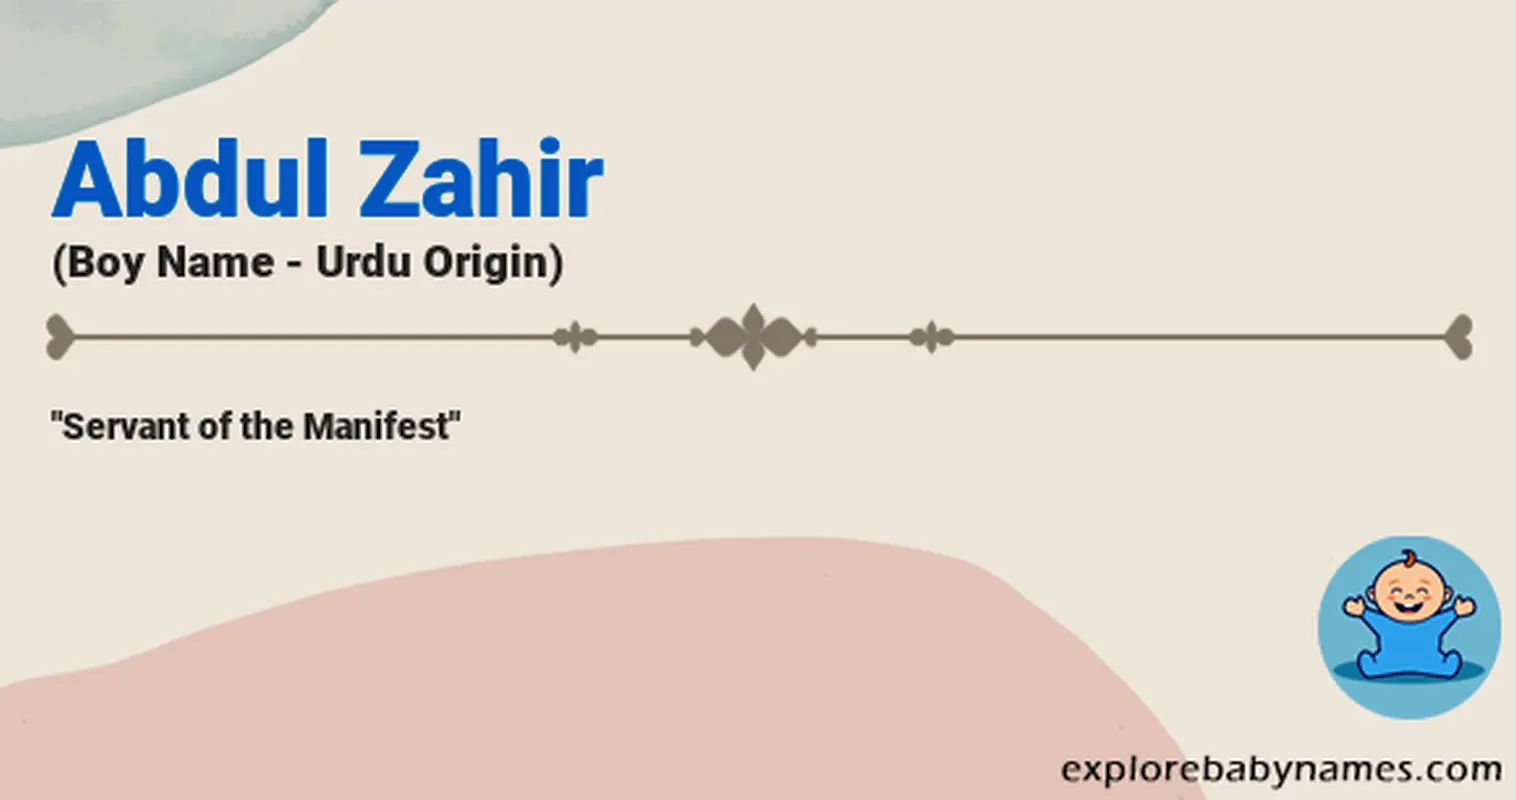 Meaning of Abdul Zahir